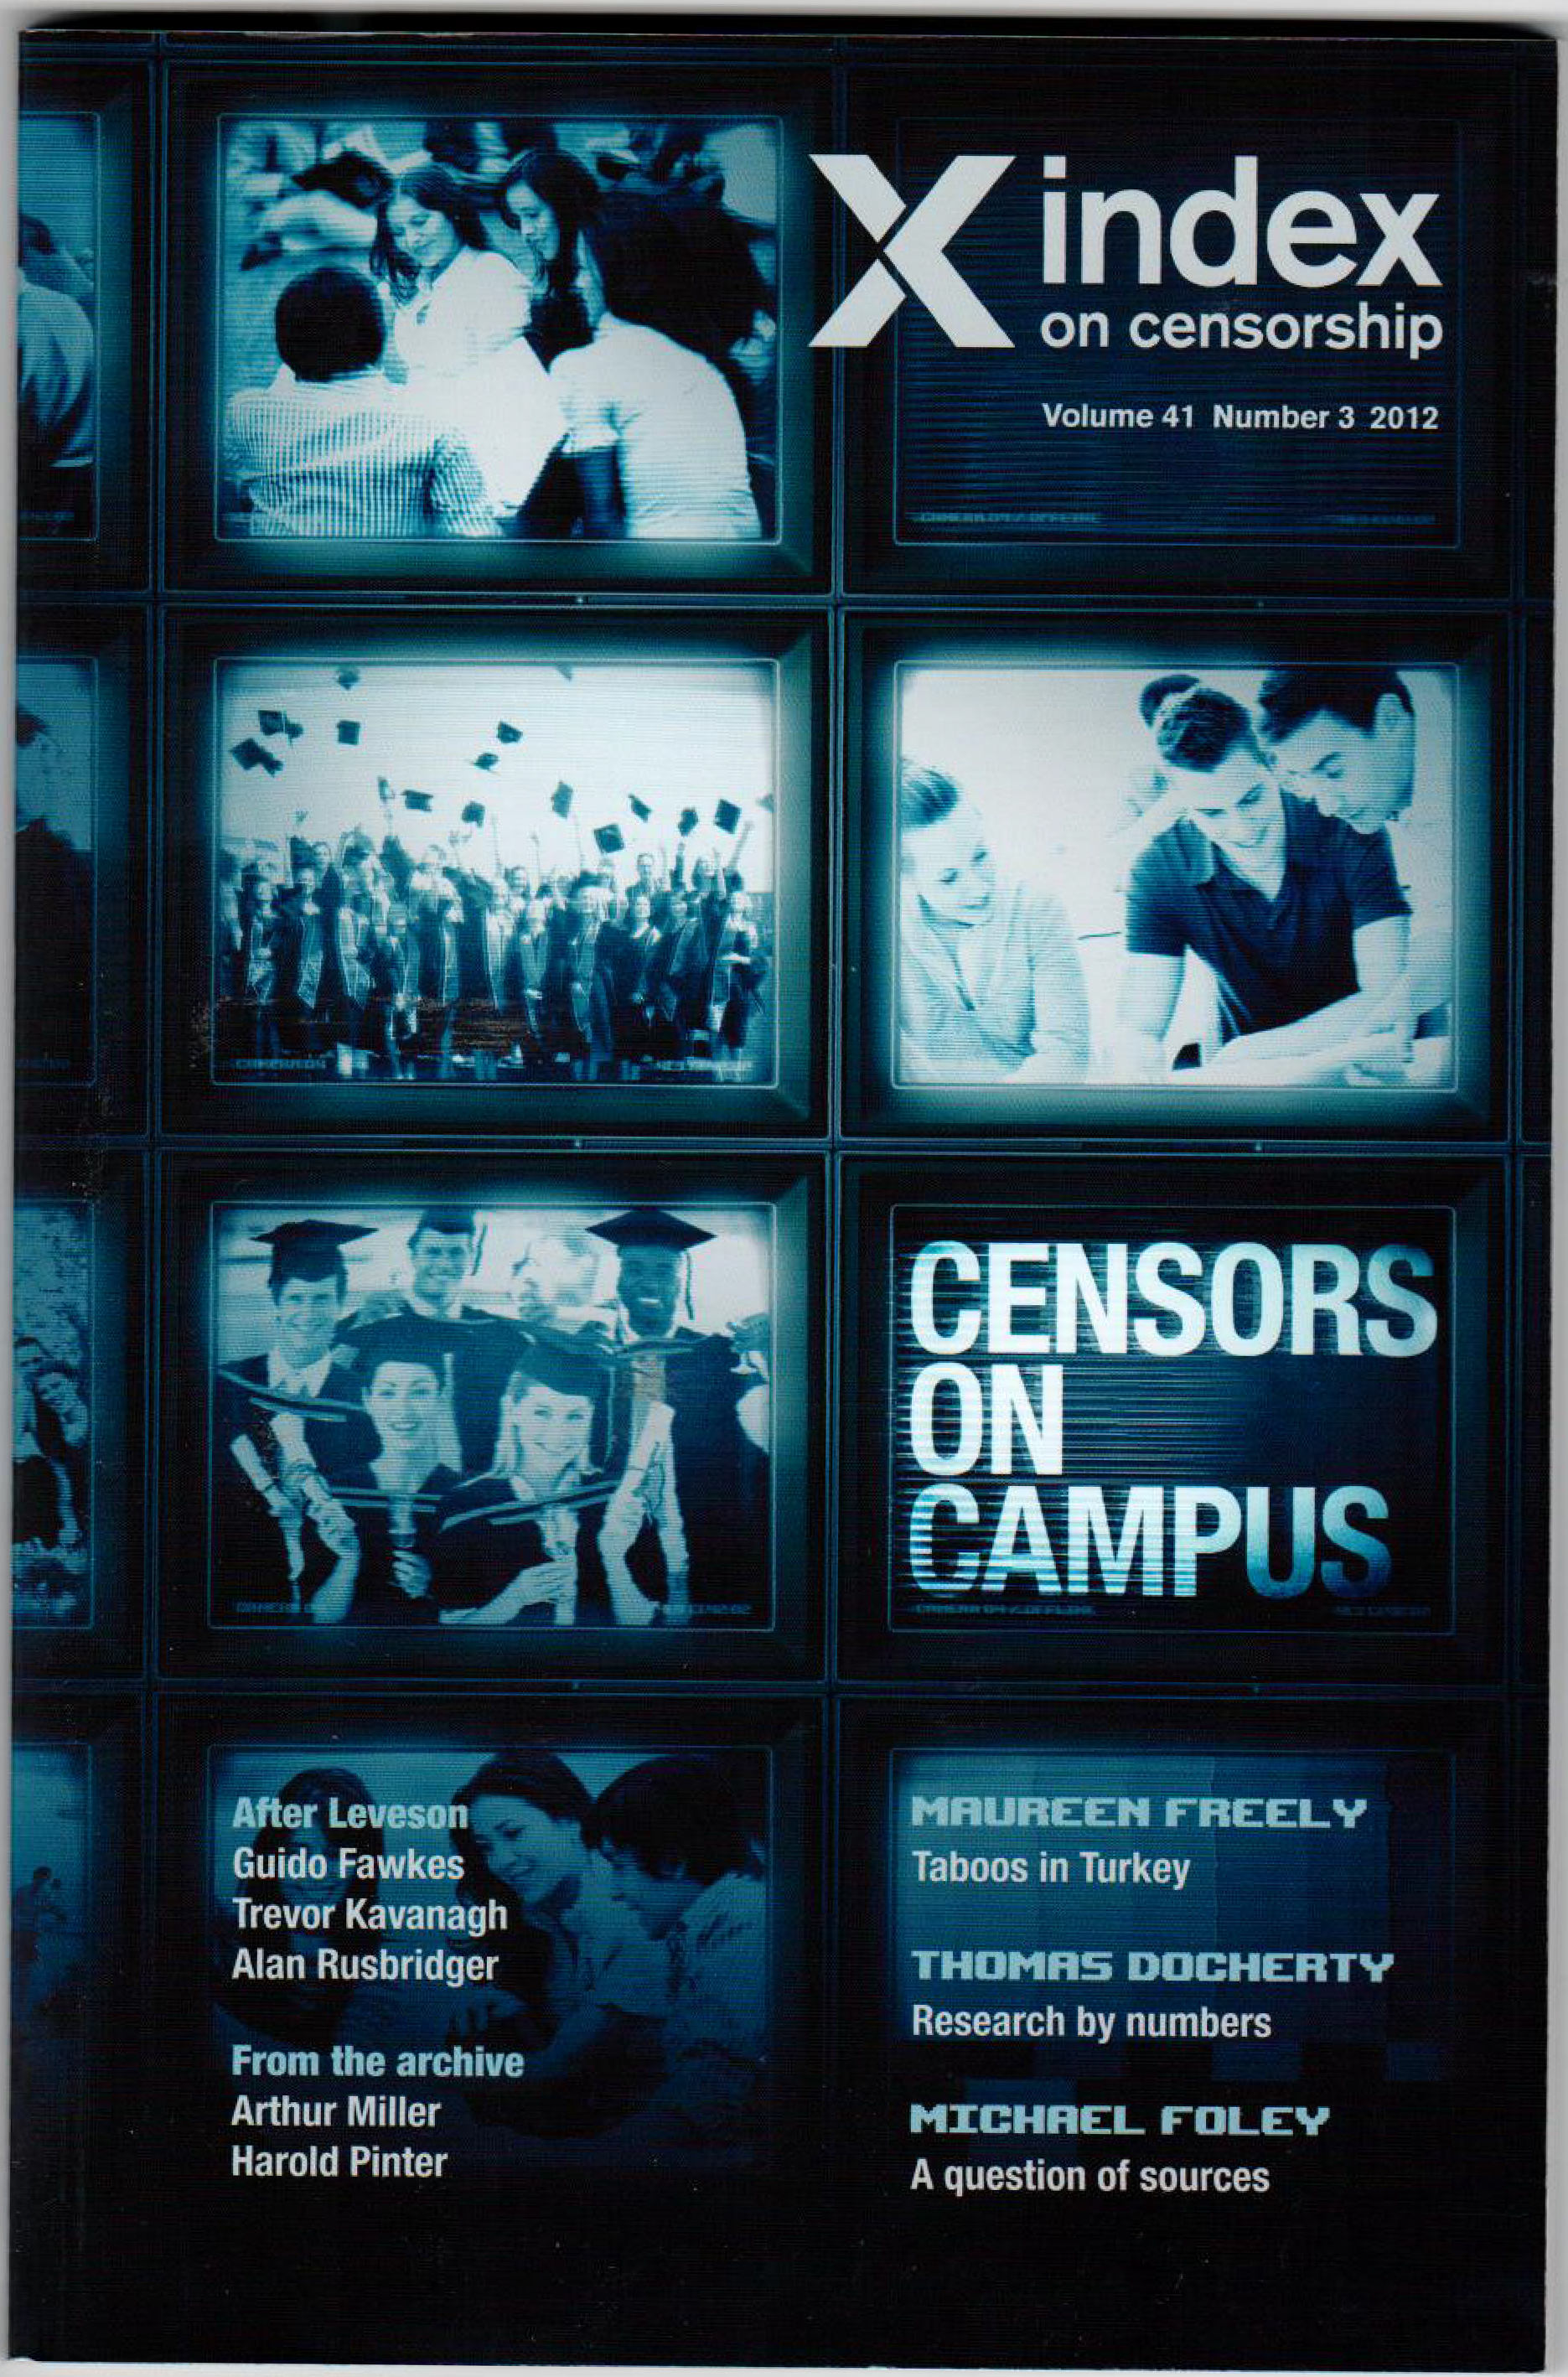 Censors on campus